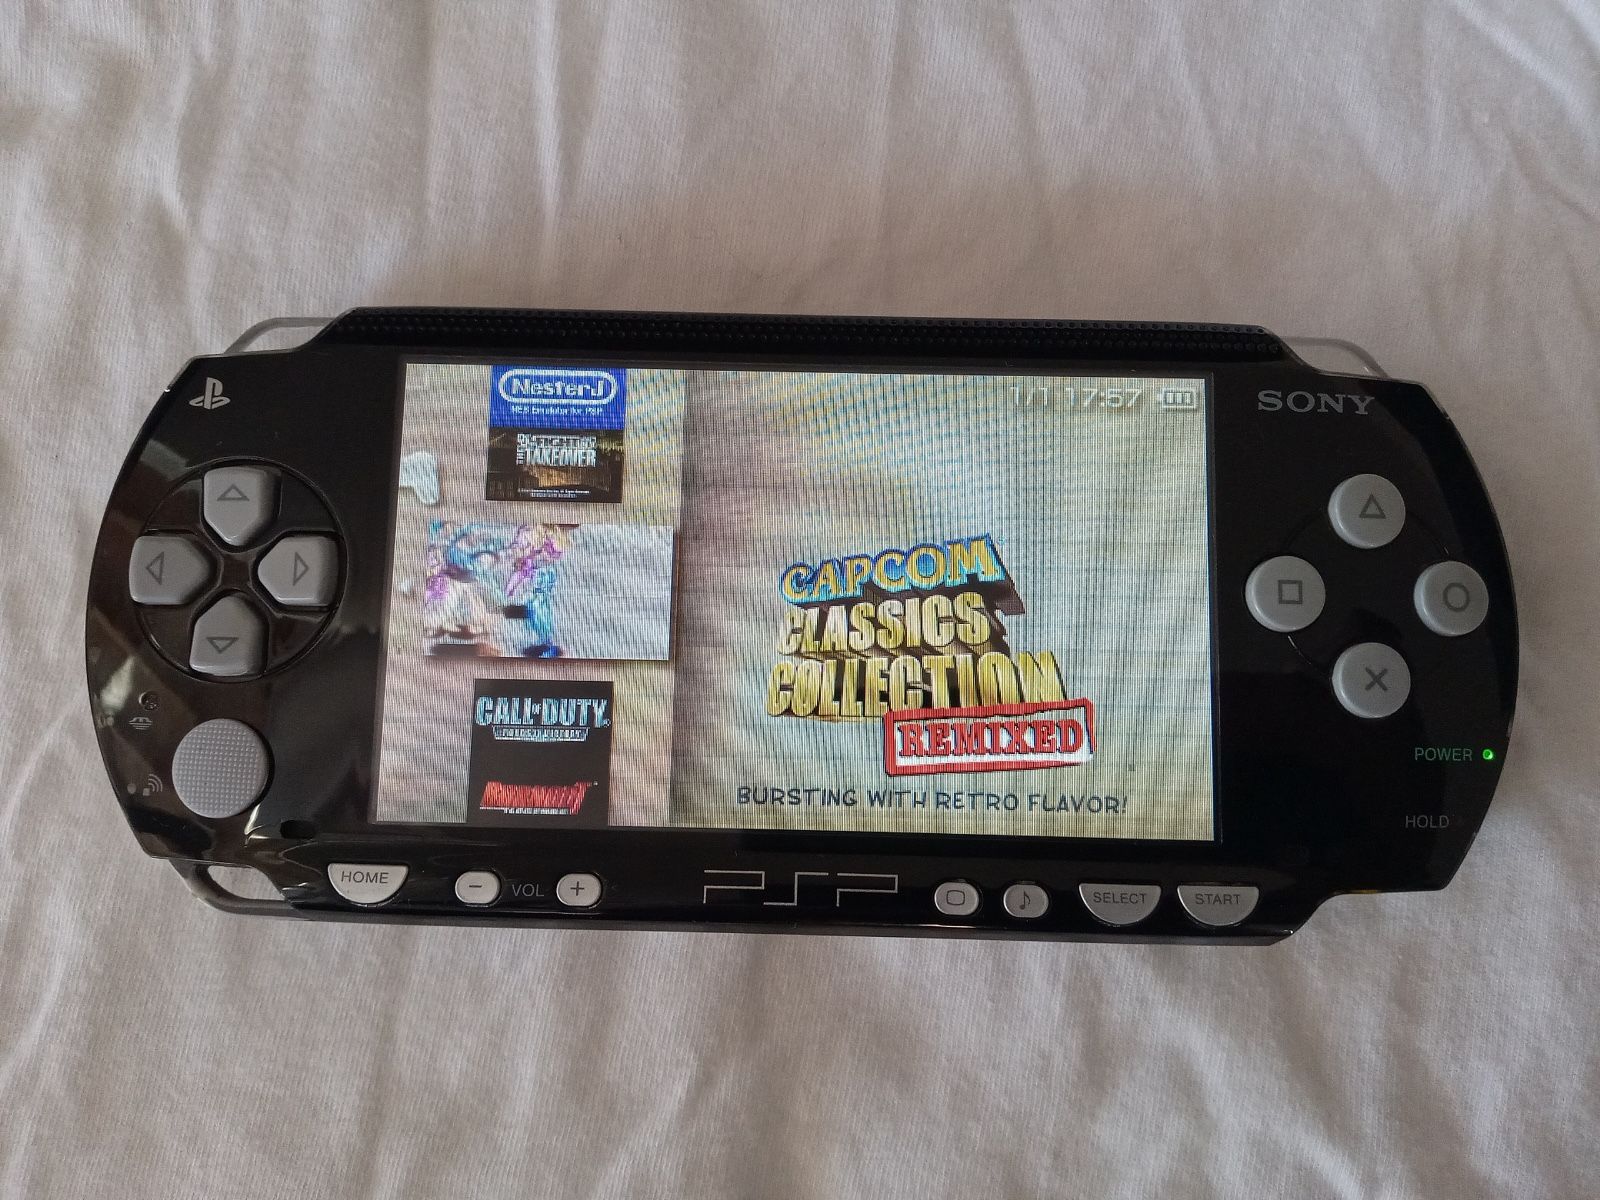 2001 * SLIM * PSP WITH 5,000 GAMES